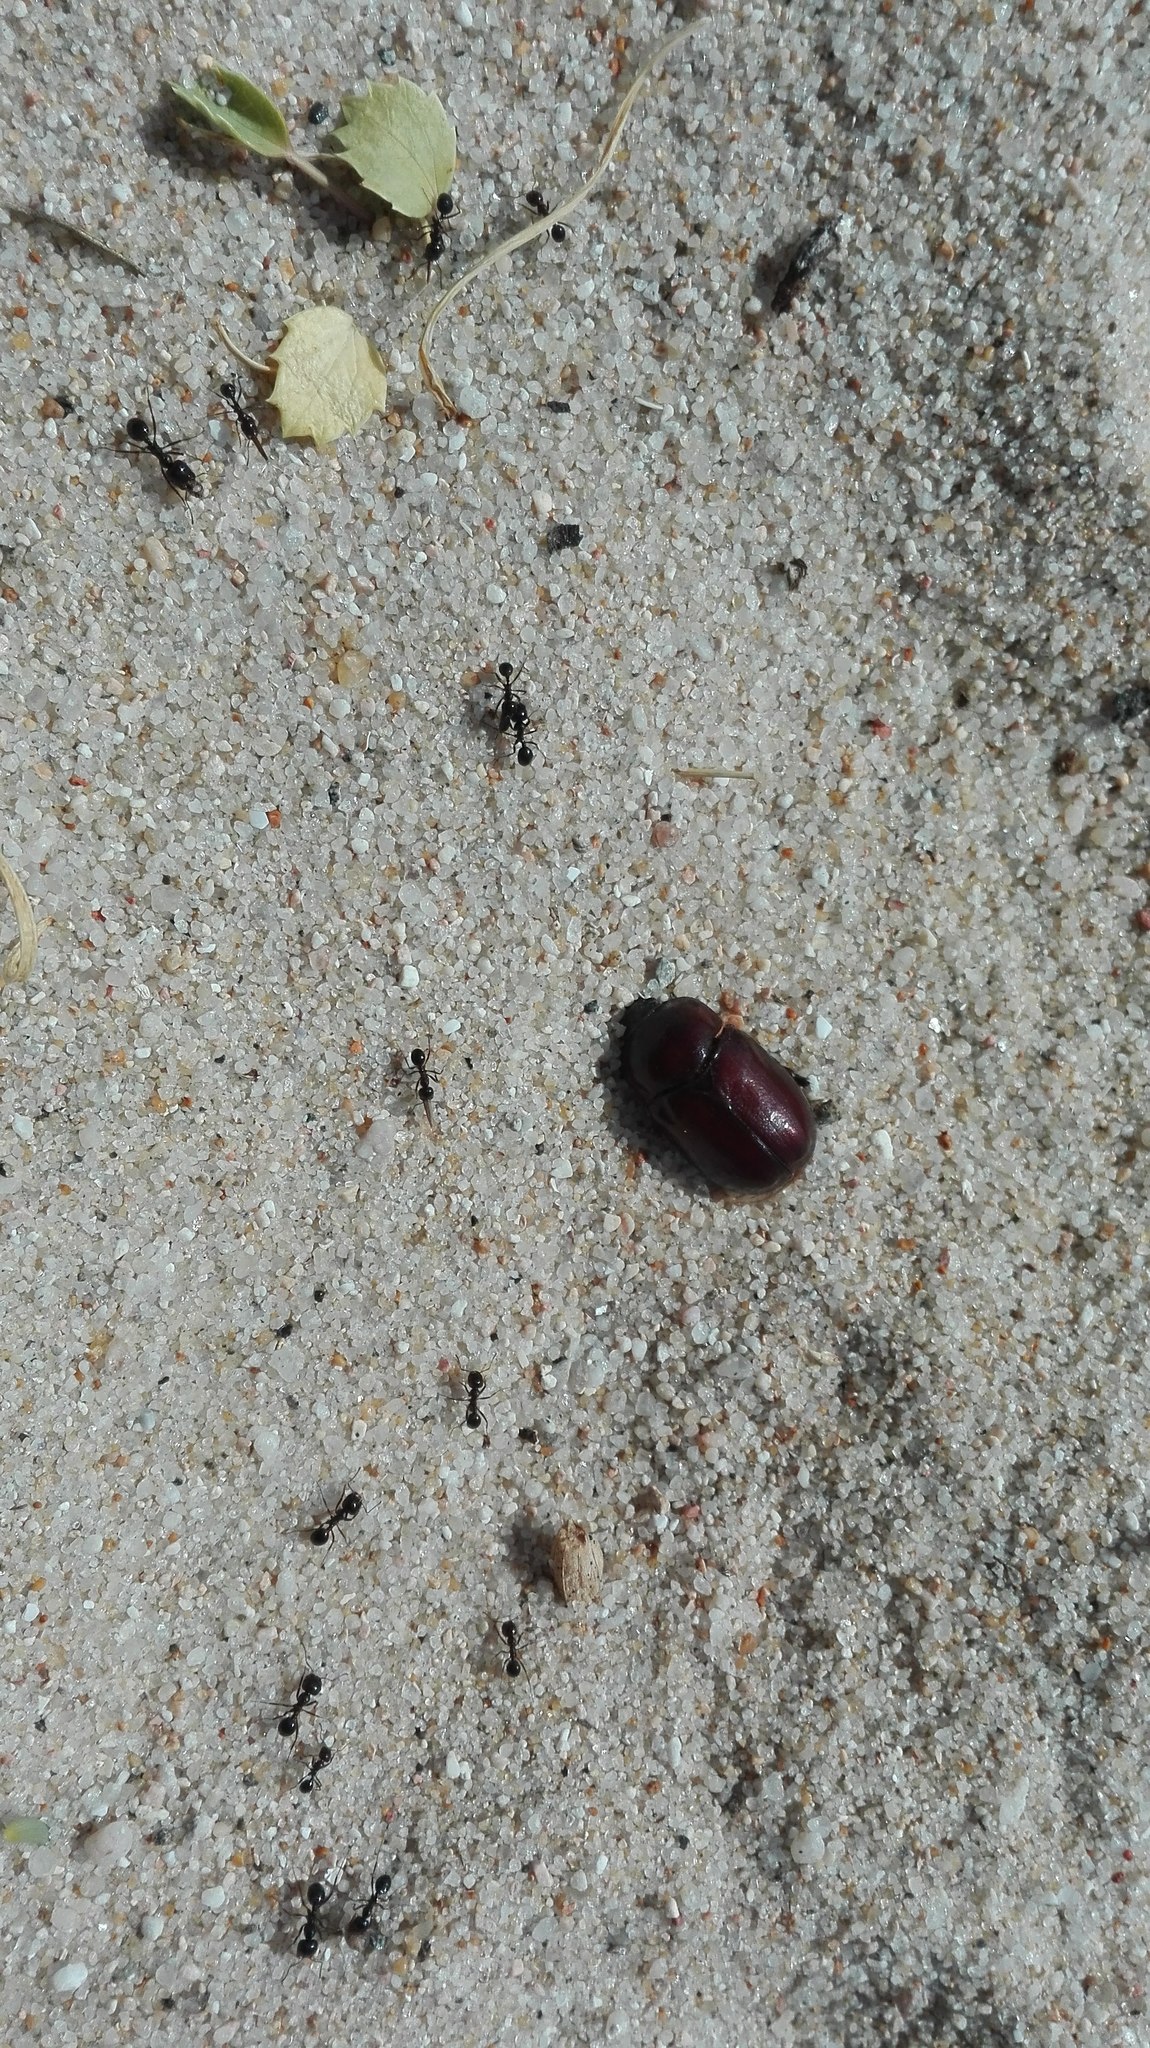 dead beetle with ants